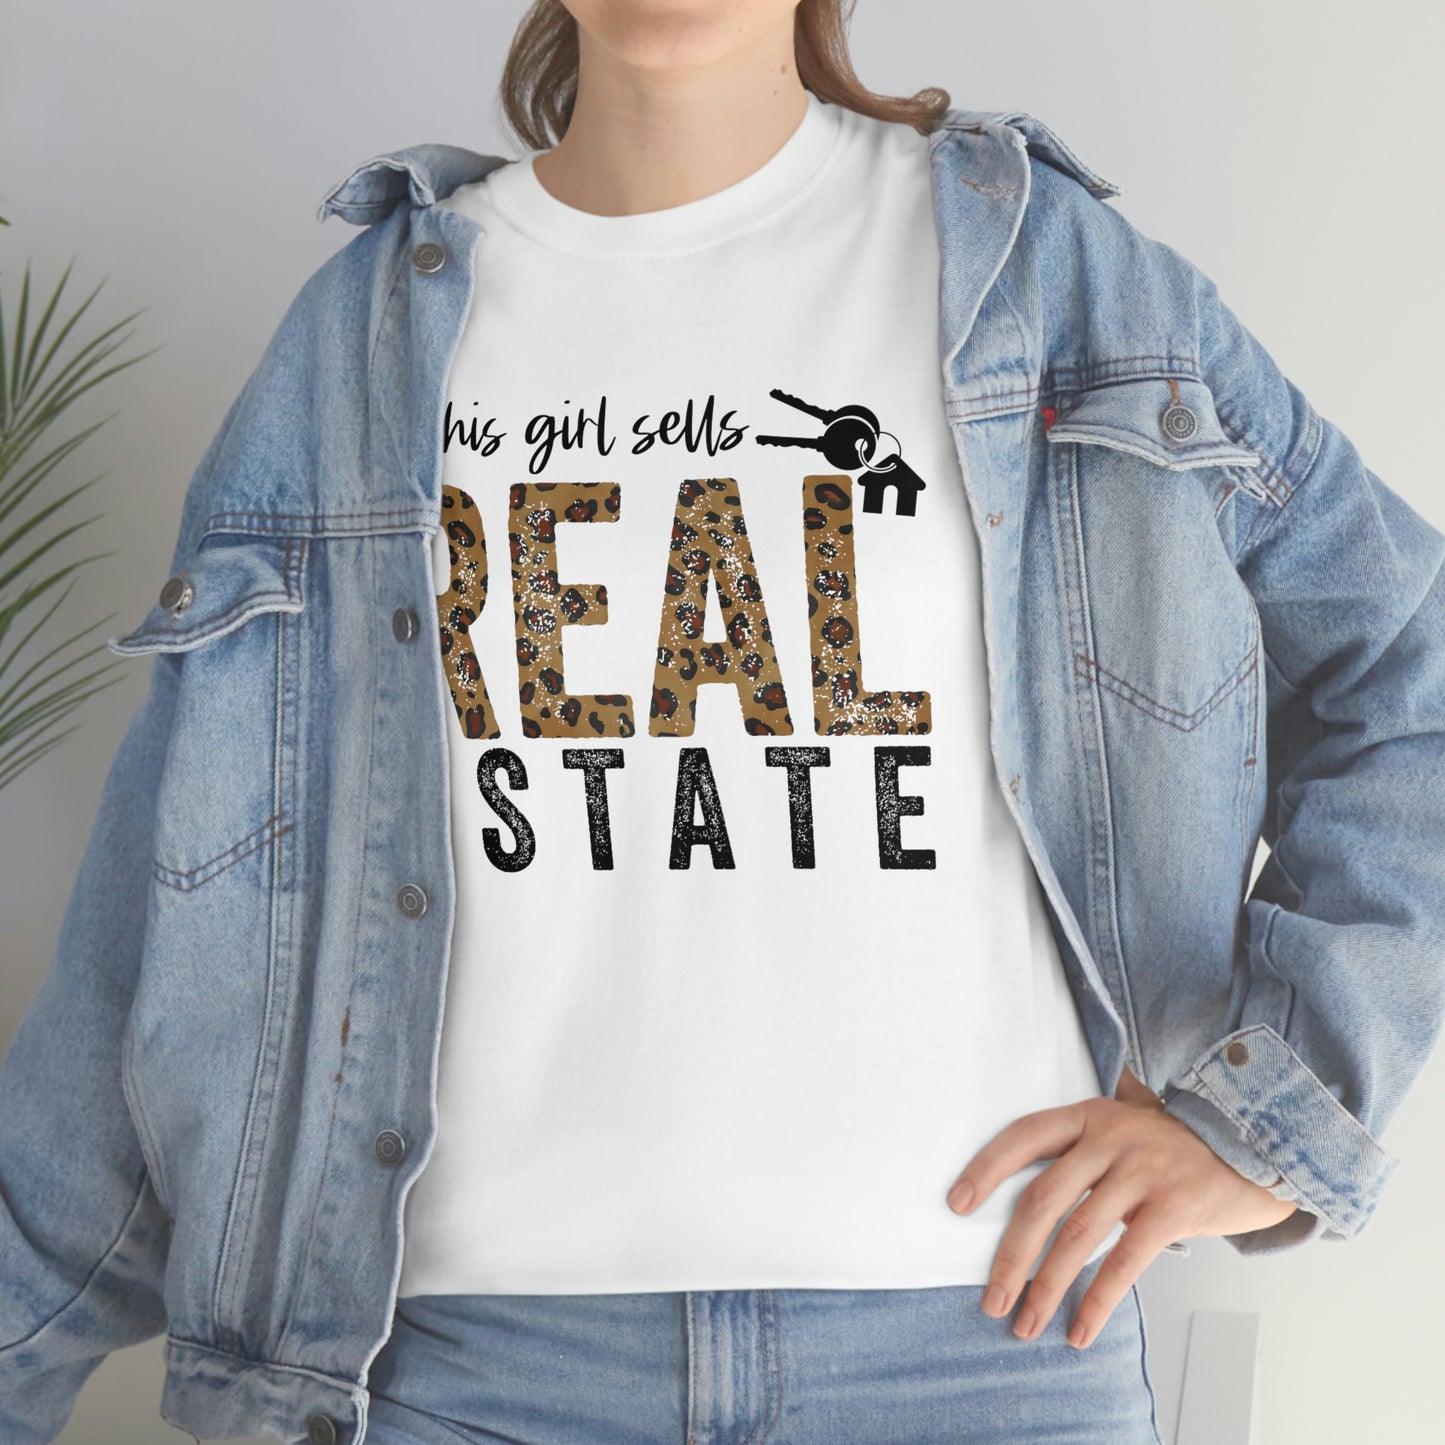 Women's Tee This Girl Sells Real Estate, Heavy Cotton Tee